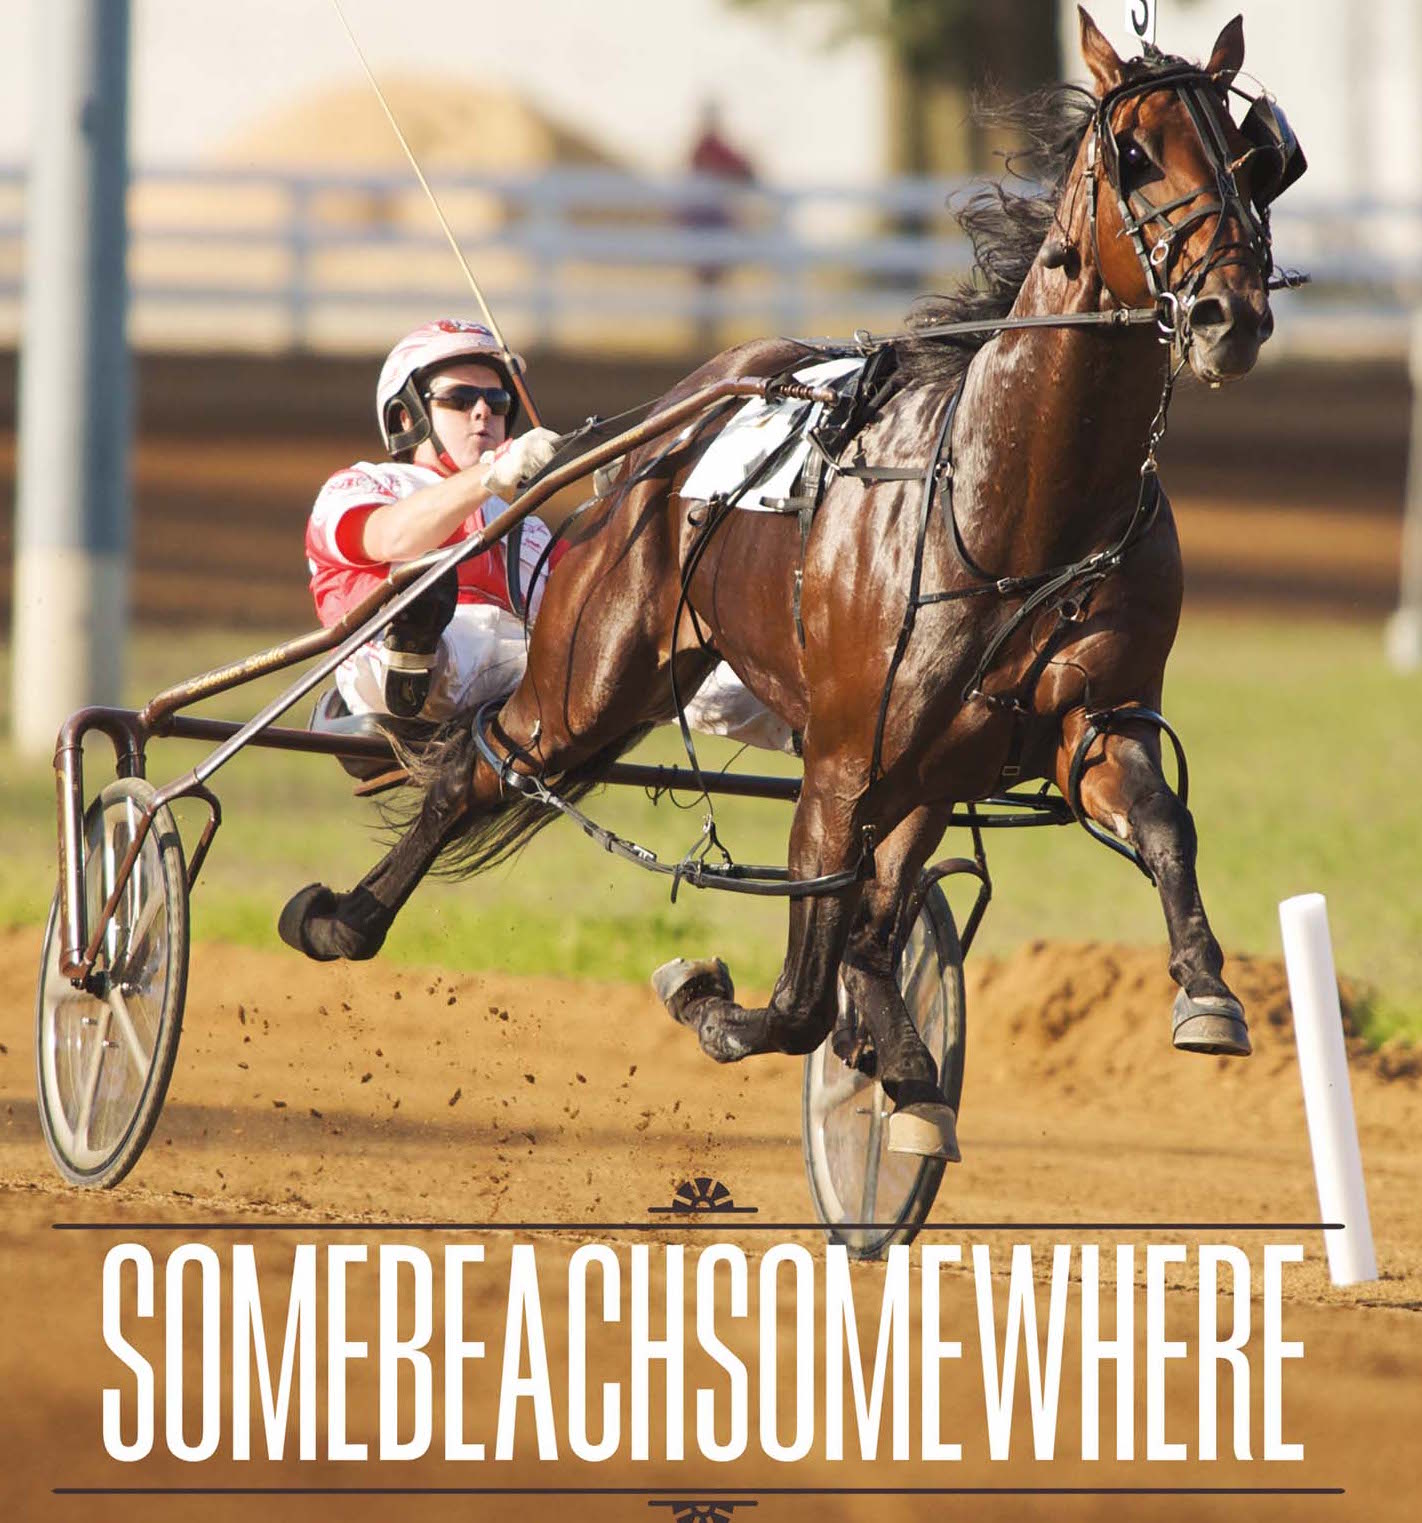 Paul MacDonell to sign Somebeachsomewhere books at Grand River Raceway’s Industry Day